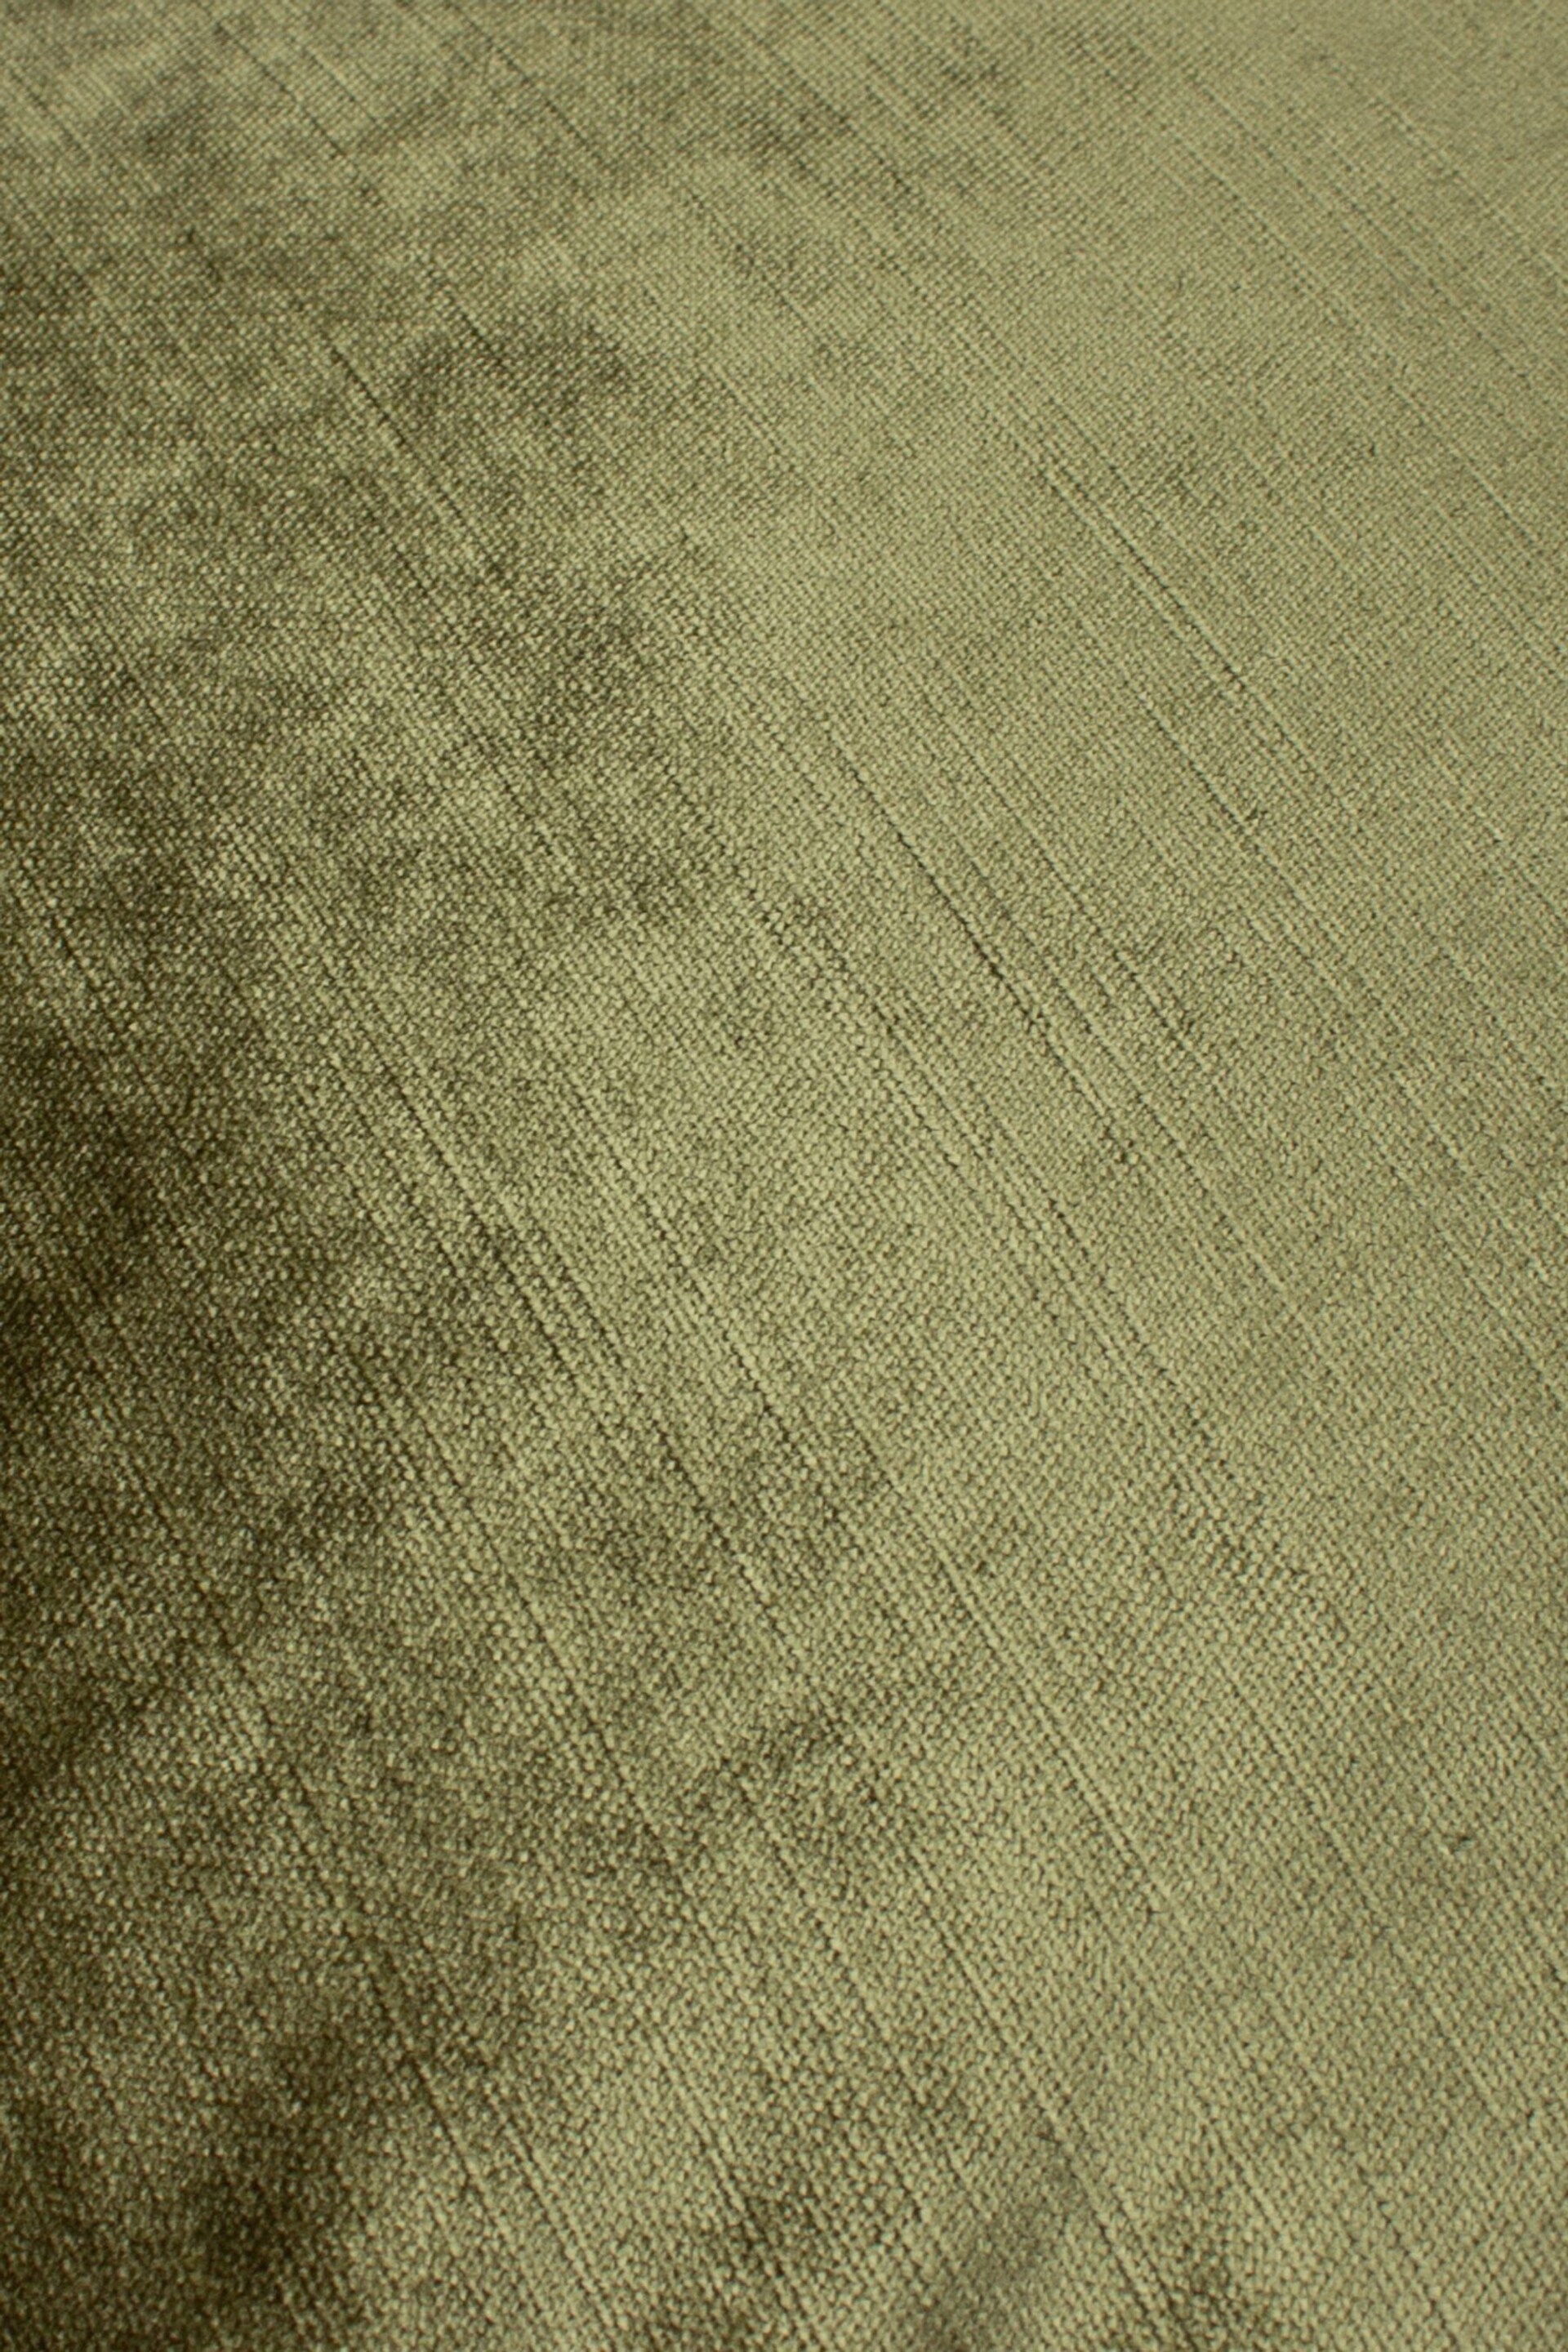 Riva Paoletti Olive Green Luxe Velvet Cushion - Image 3 of 3